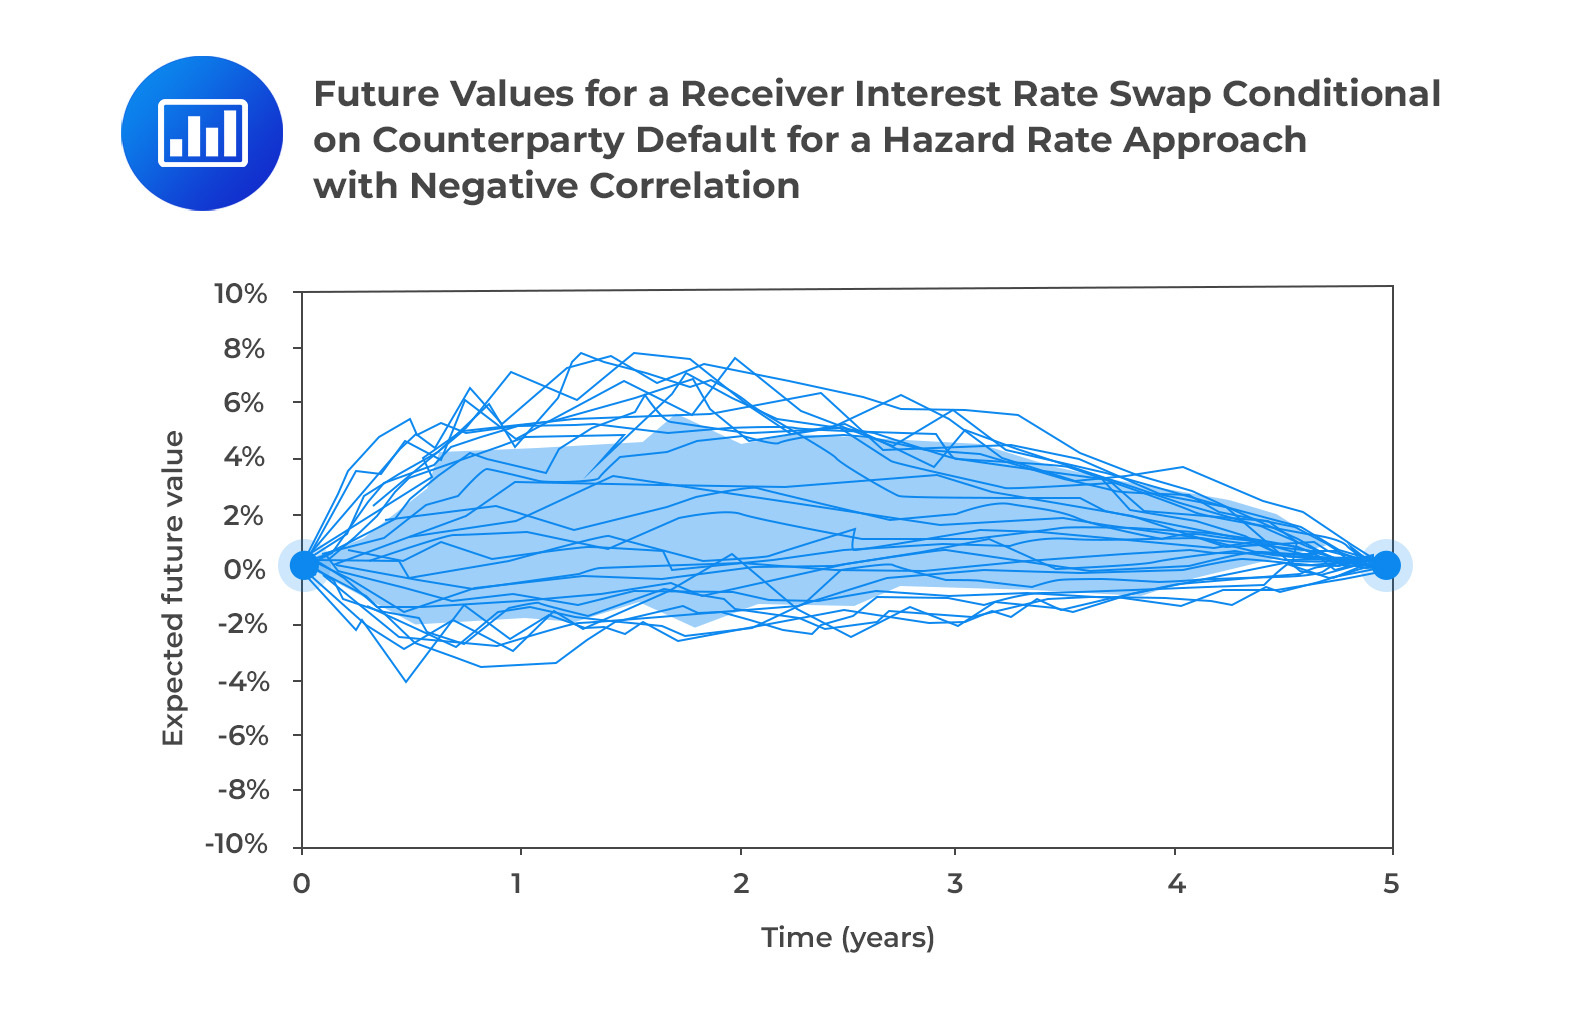 Future values for a receiver interest rate swap conditional on counterparty default for a hazard rate approach with negative correlation.